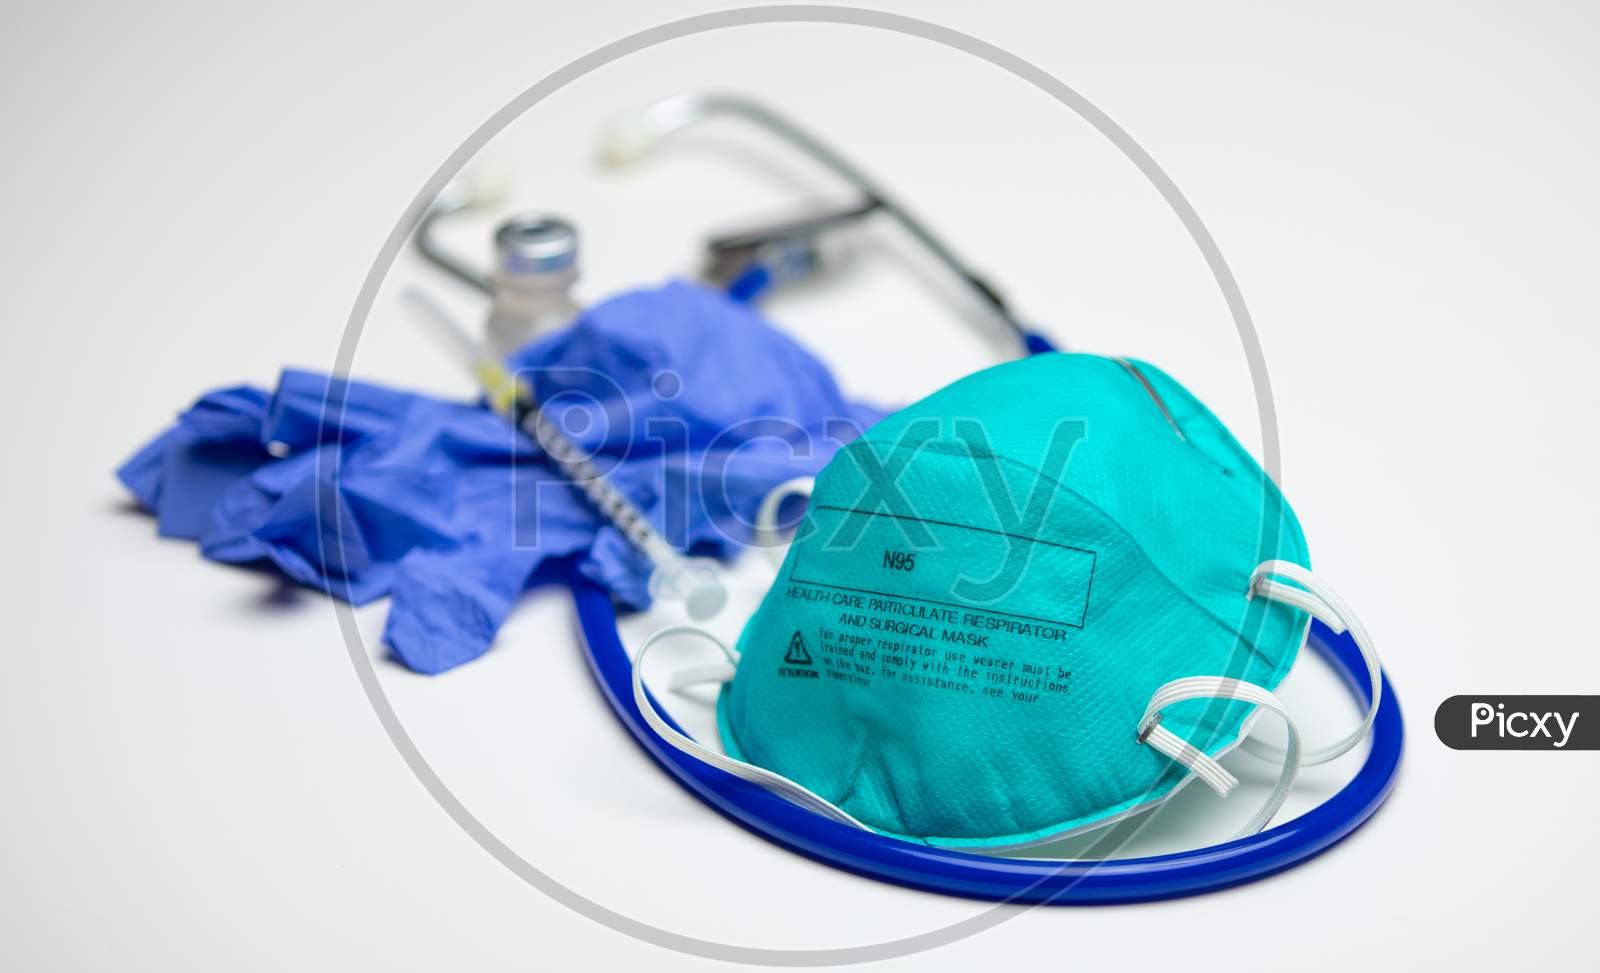 A Health Care Particulate Respirator And Surgical Mask On Top Of A Stethoscope. Gloves, Syringe And Vial In Background.